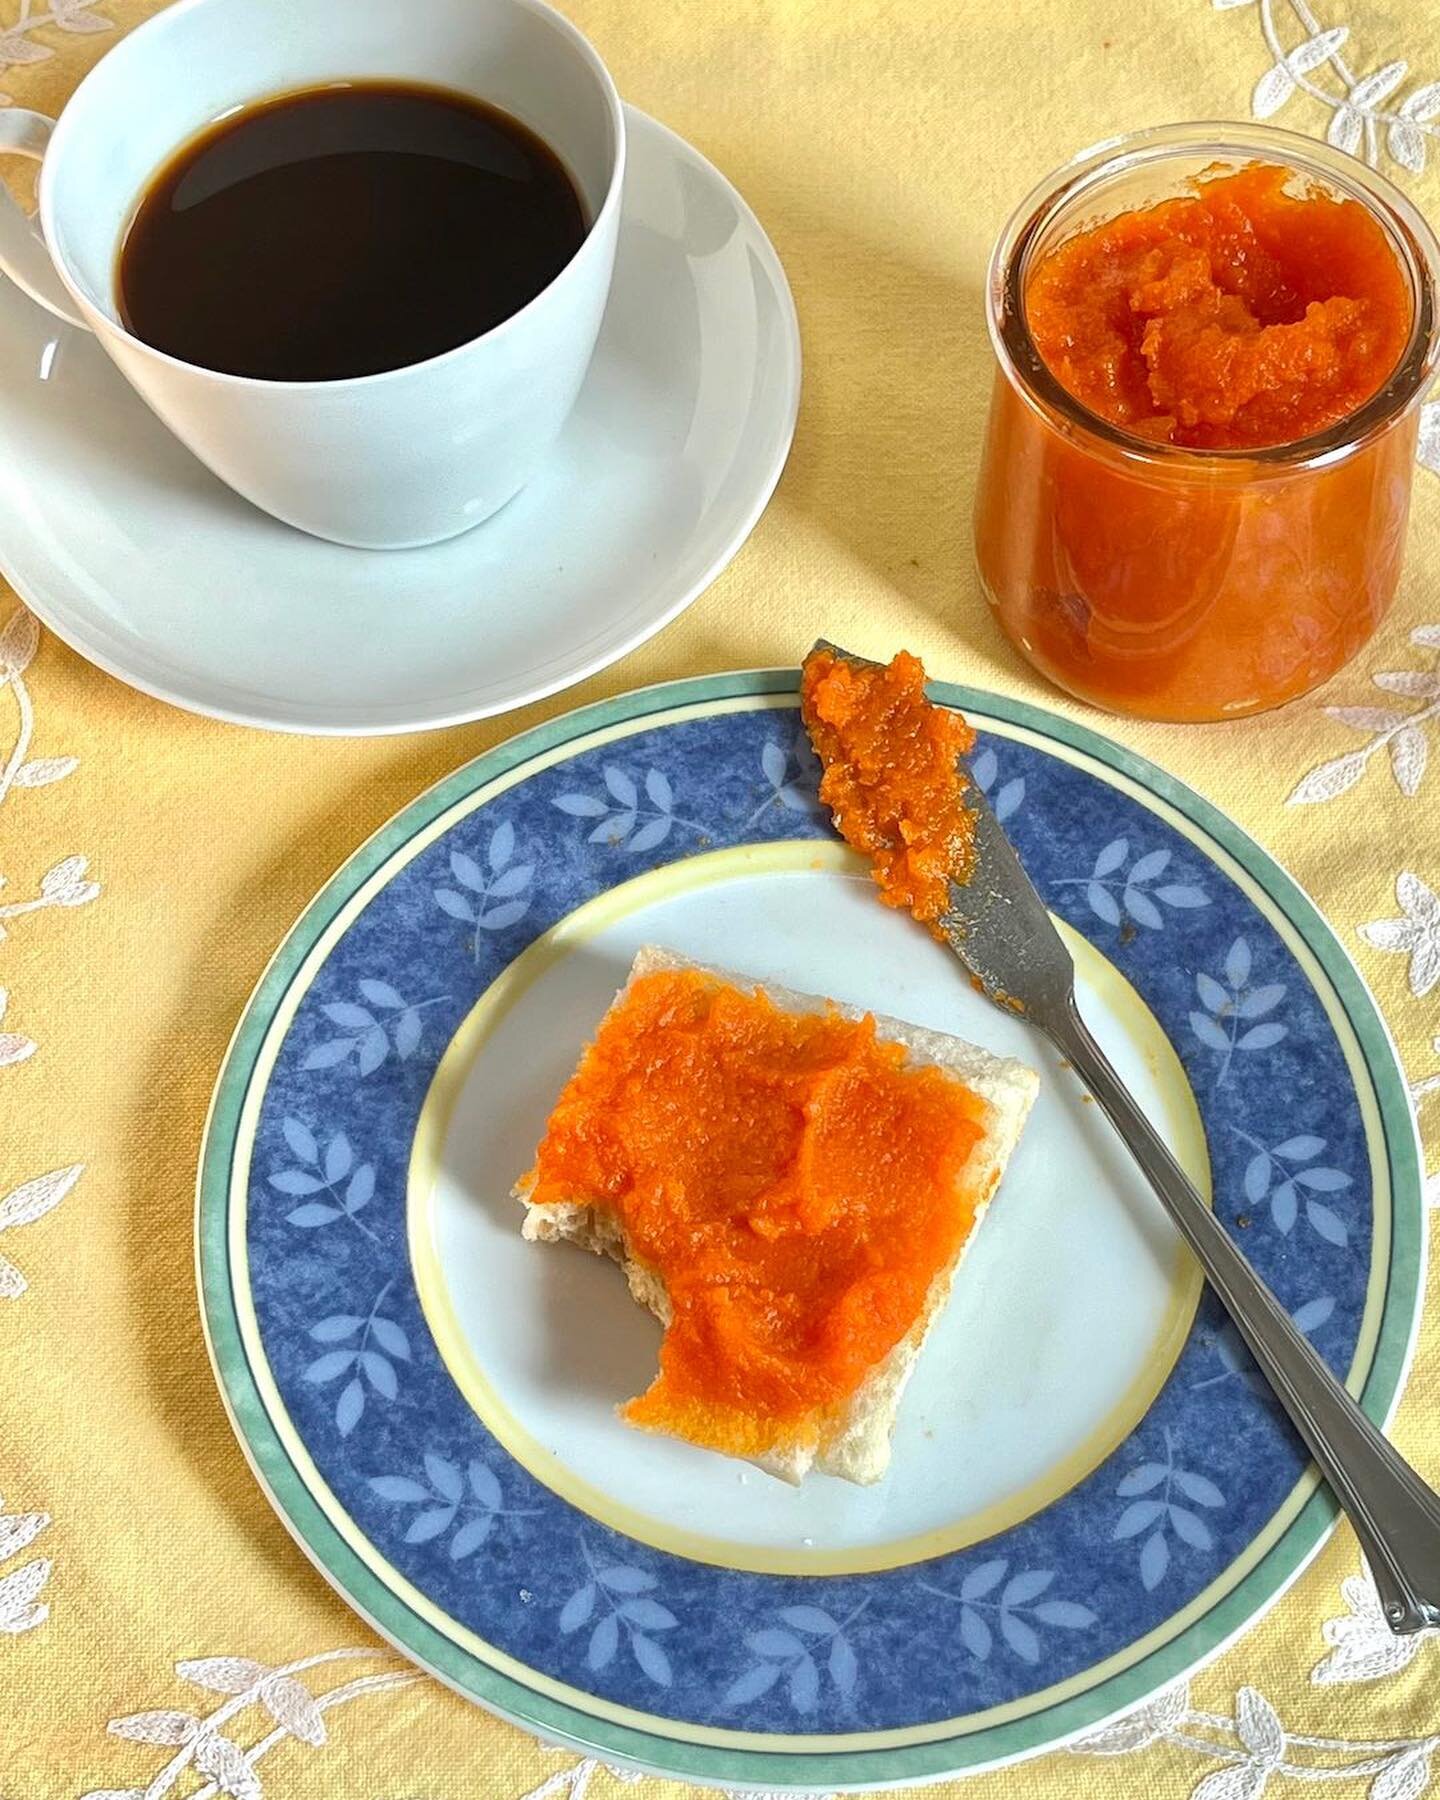 This light Italian Lemony Carrot Marmalade spread offers a wonderful option for breakfast or brunch, and a light, flavorful accent for a cheese board or charcuterie. Recipe by Toni Lyldecker from her book &ldquo;Piatto Unico&rdquo; published by Lake 